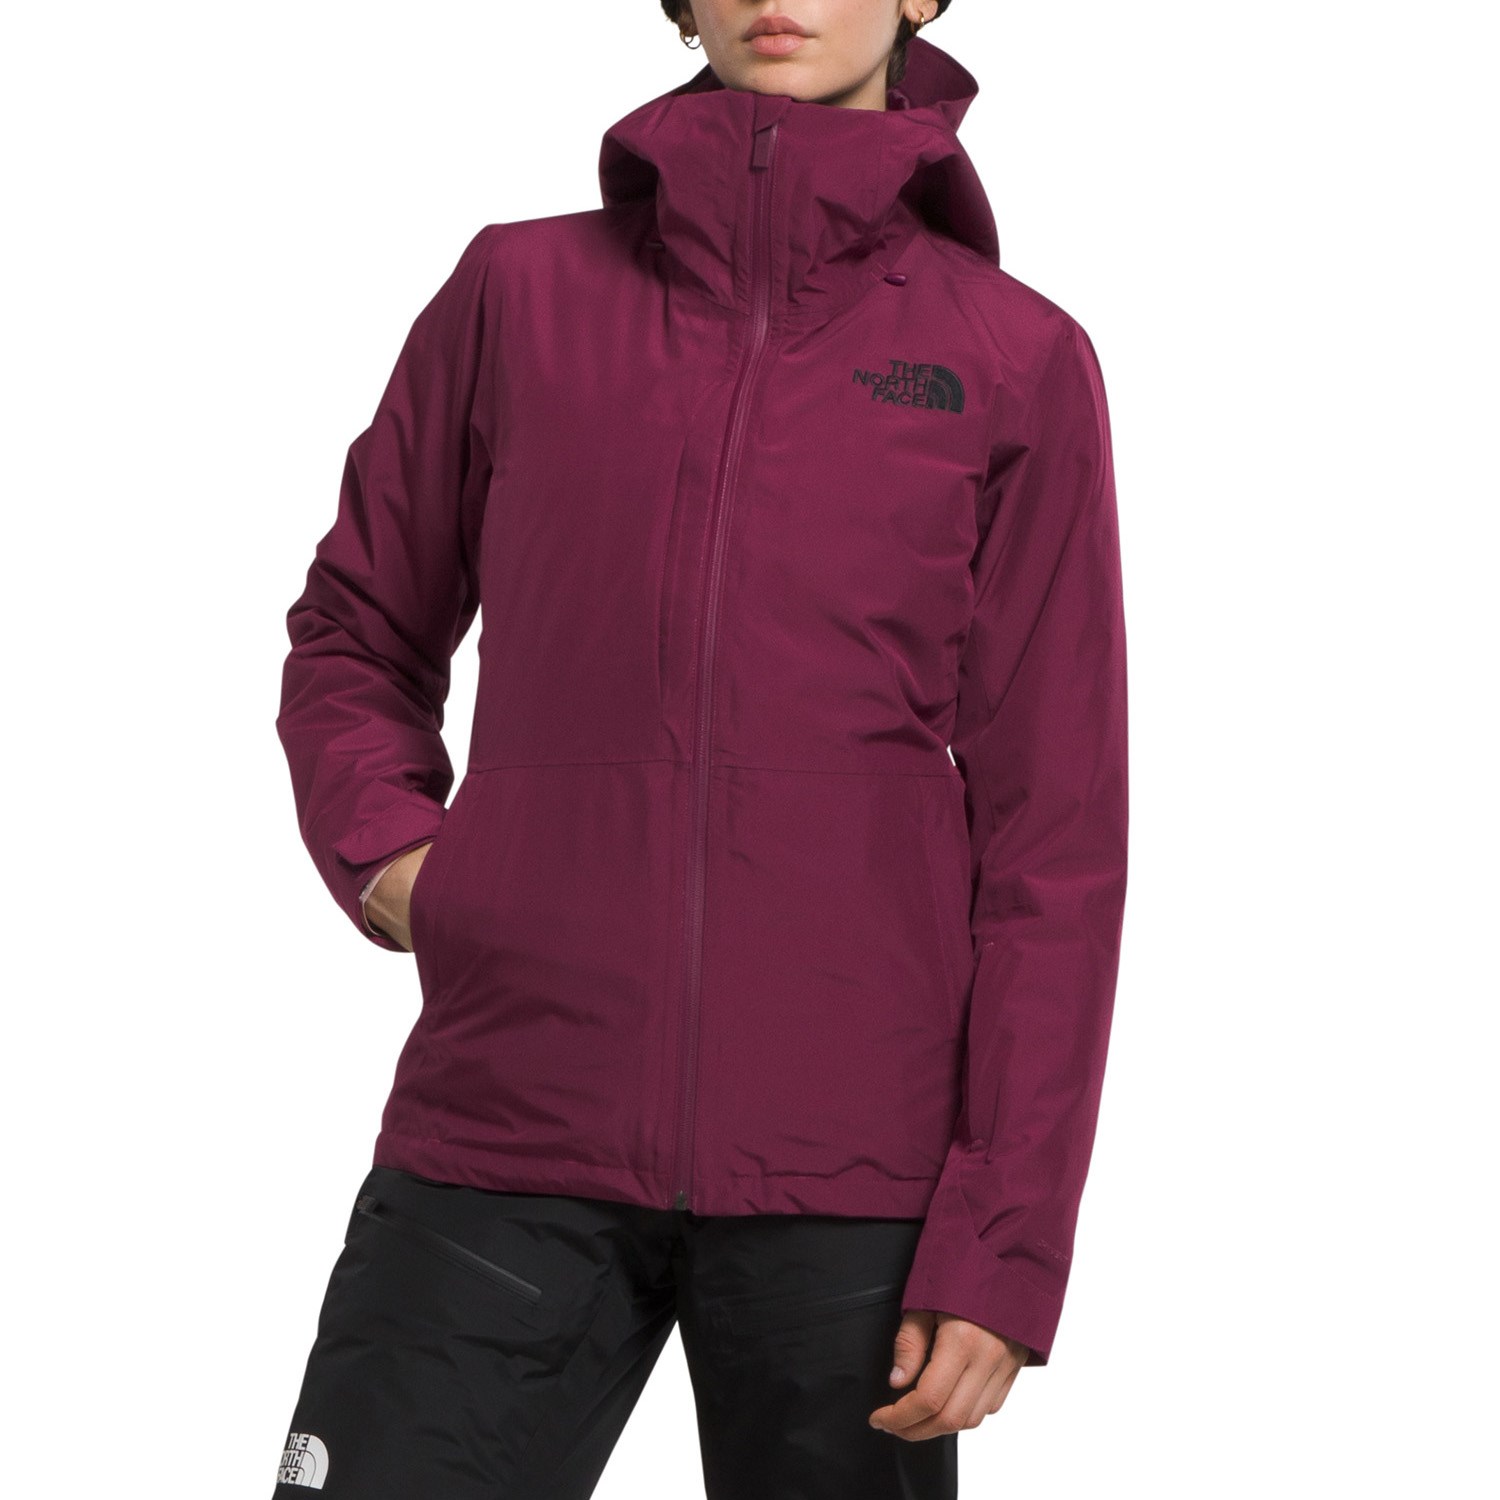 Куртка The North Face ThermoBall Eco Snow Triclimate, цвет Boysenberry куртка the north face thermoball eco 2 0 plus цвет boysenberry